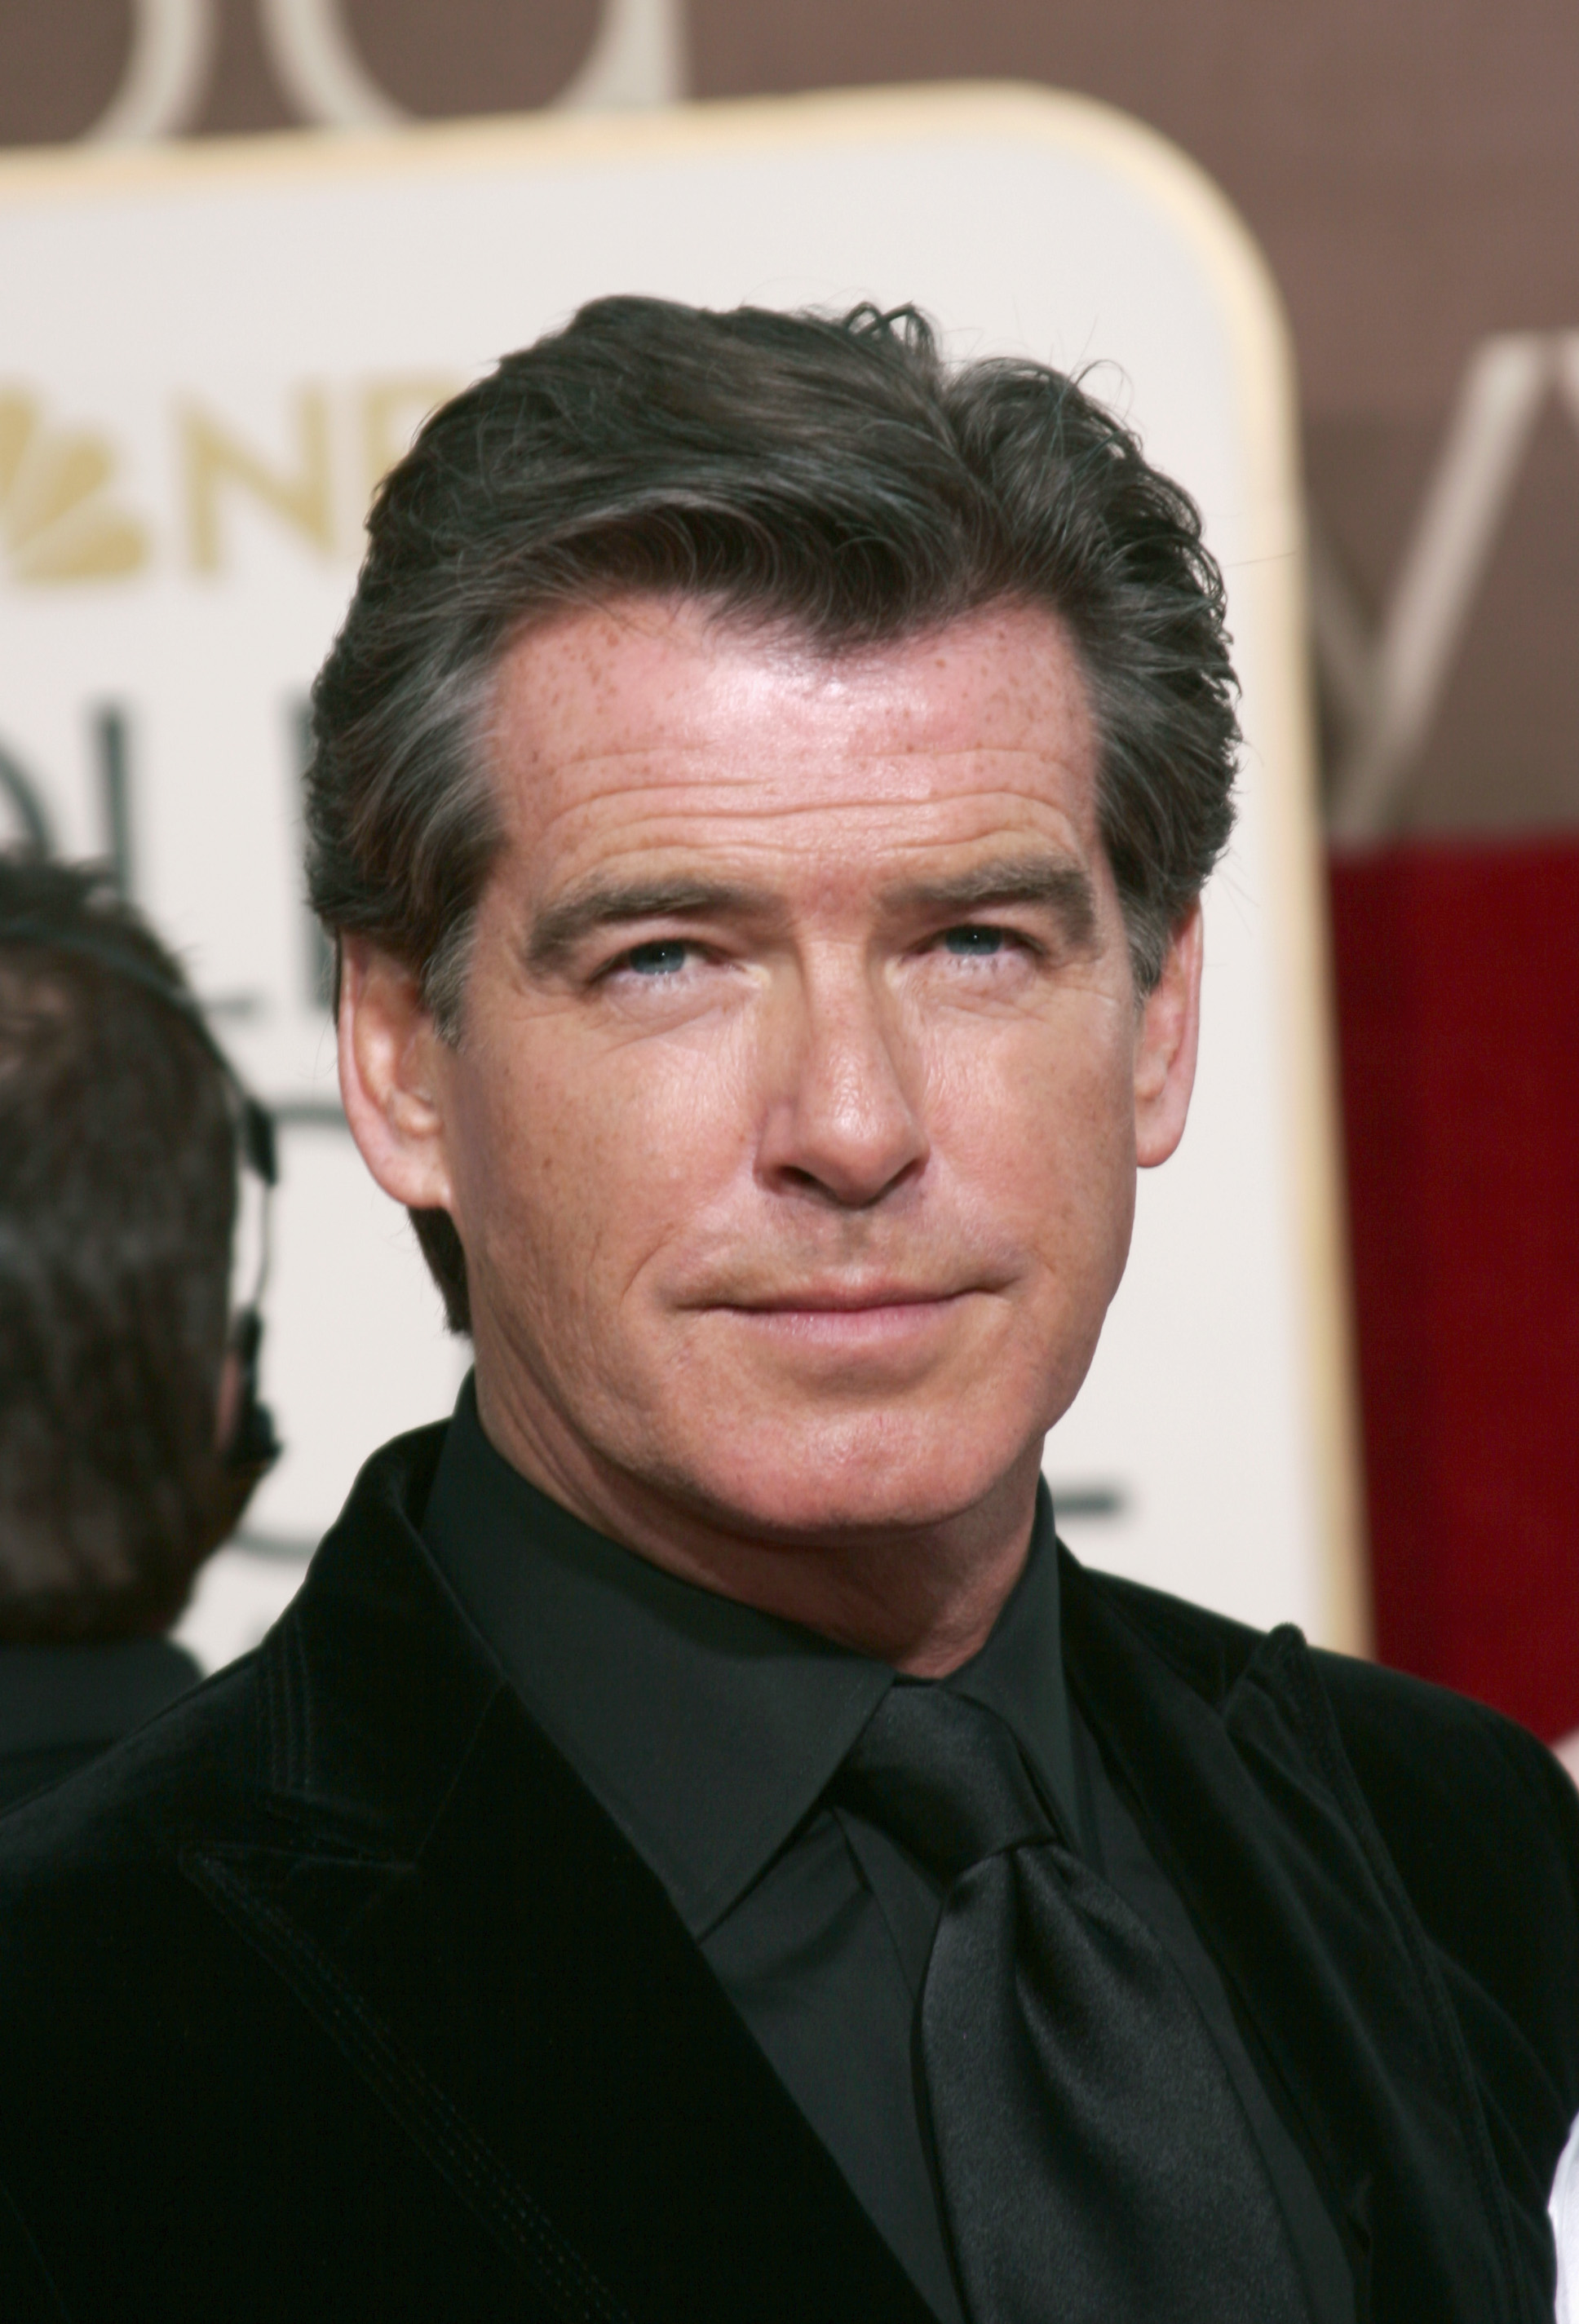 Pierce Brosnan at the Golden Globe Awards in California in 2006 | Source: Getty Images